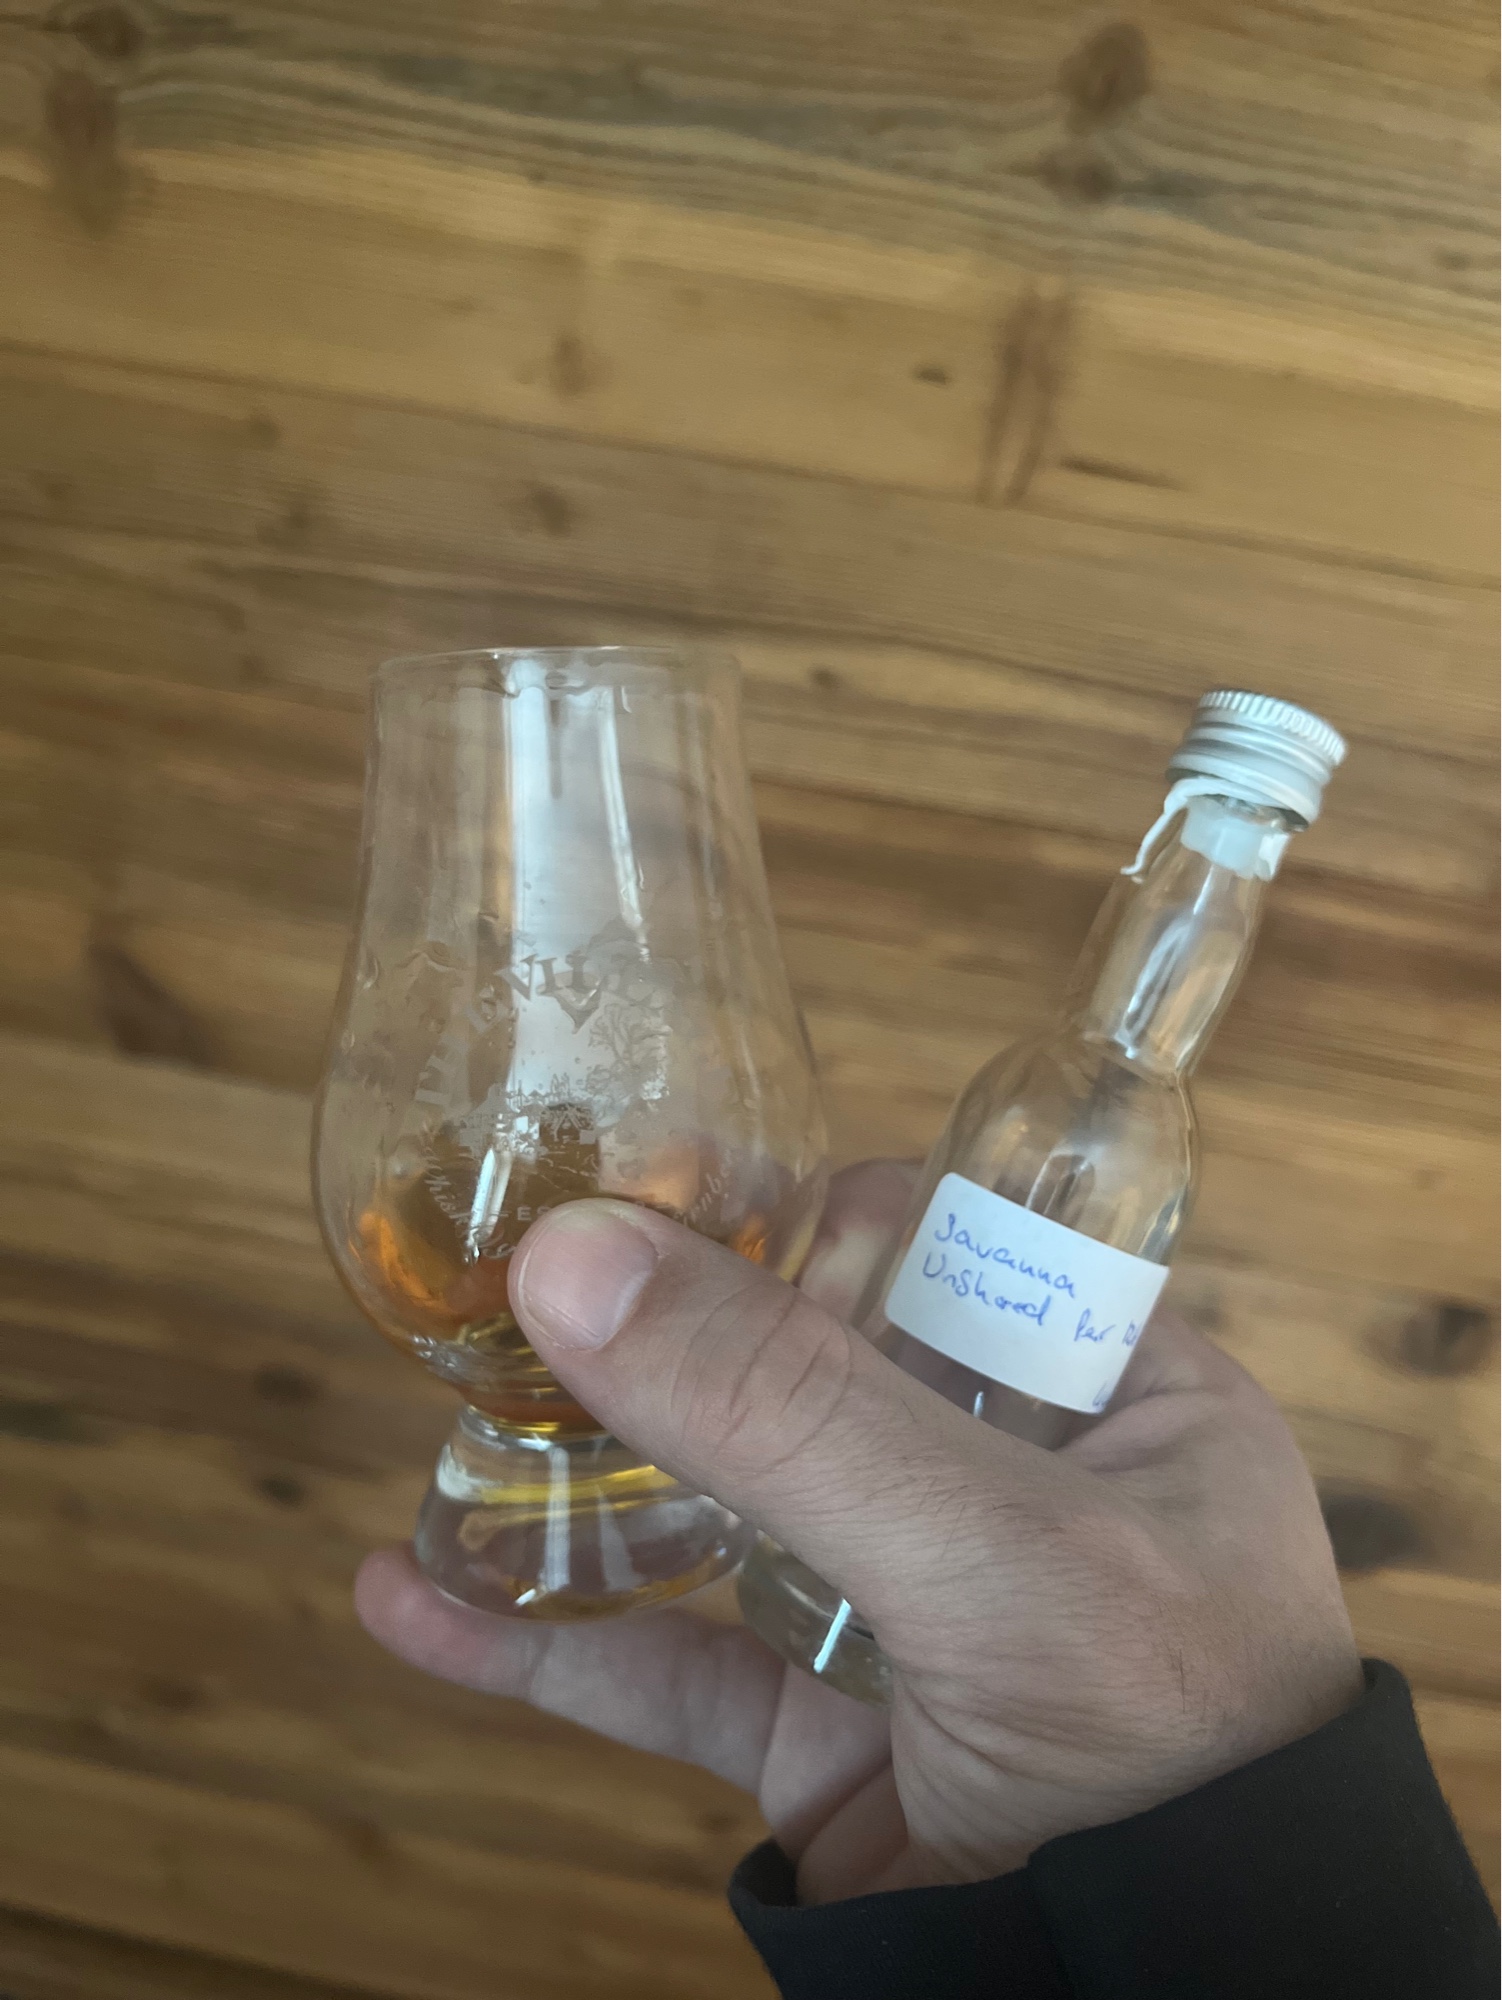 Photo of the bottle taken from user Serge